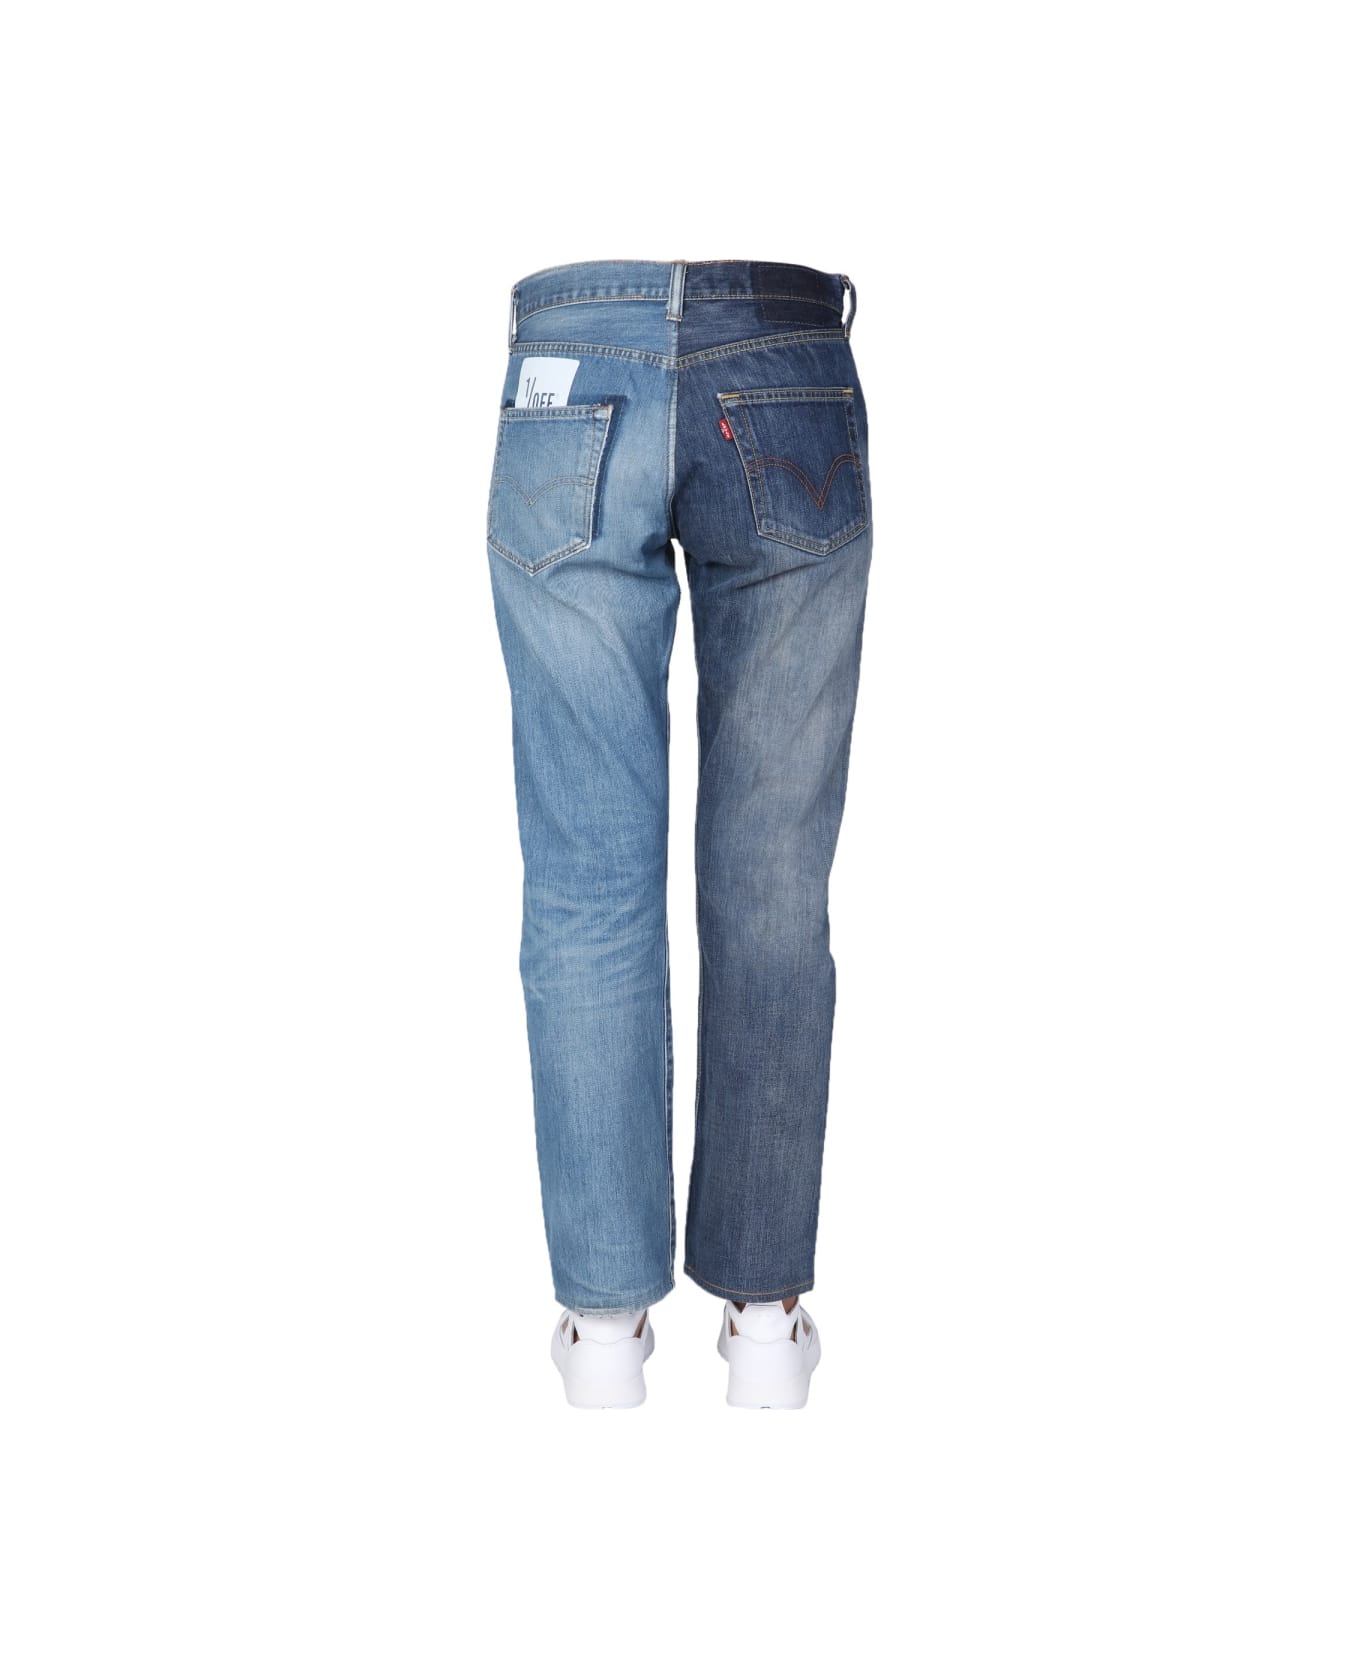 1/OFF 50/50 Jeans - MULTICOLOUR name:463